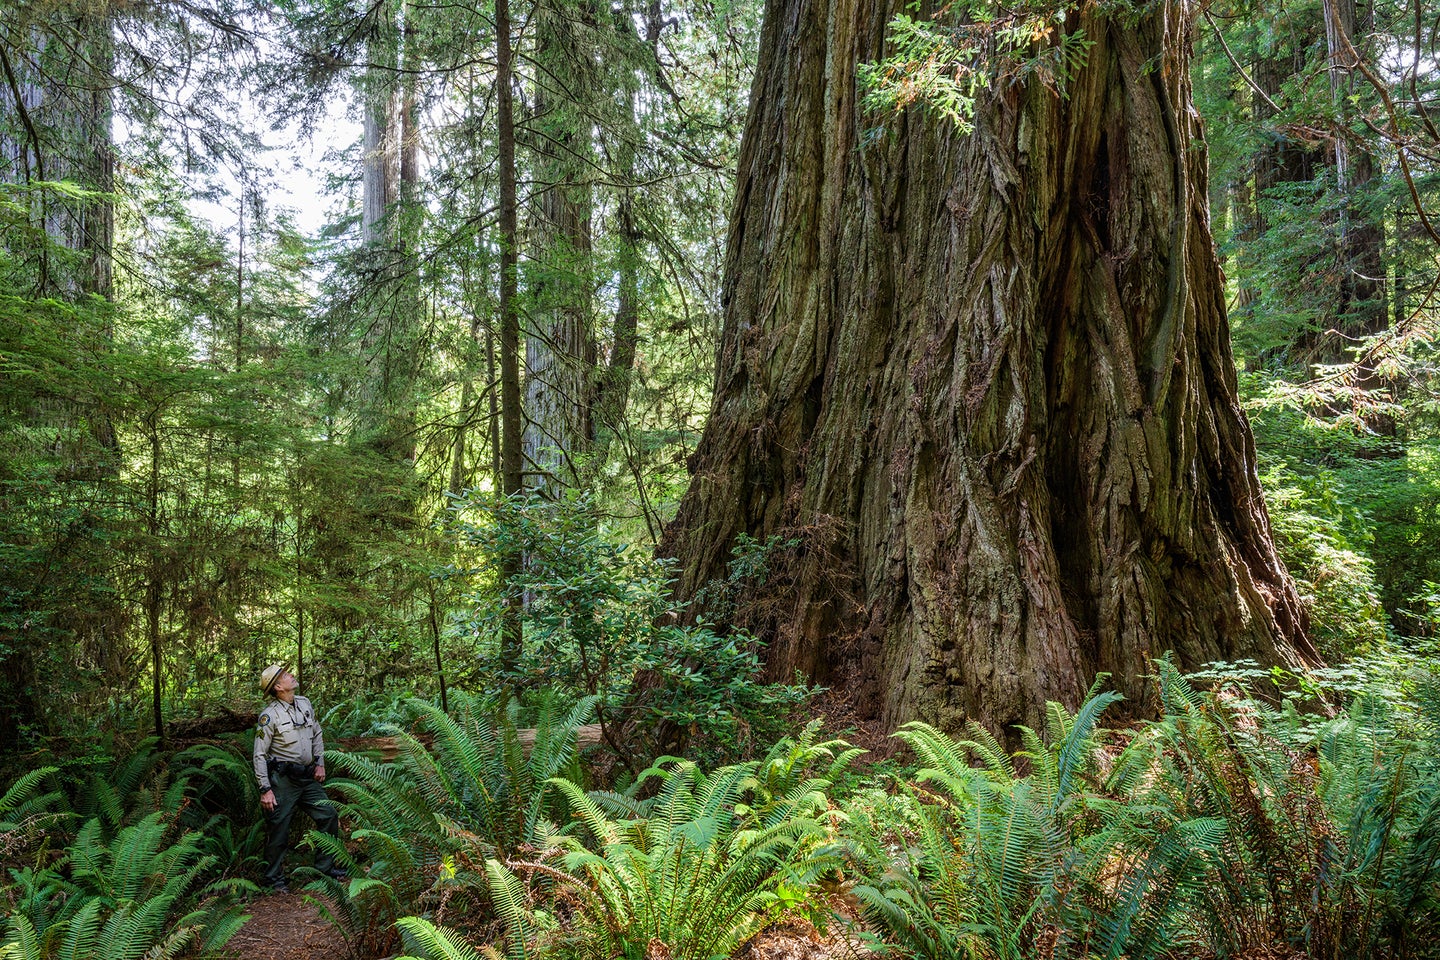 Researchers sequenced giant redwood genomes to kickstart a 23andMe for trees